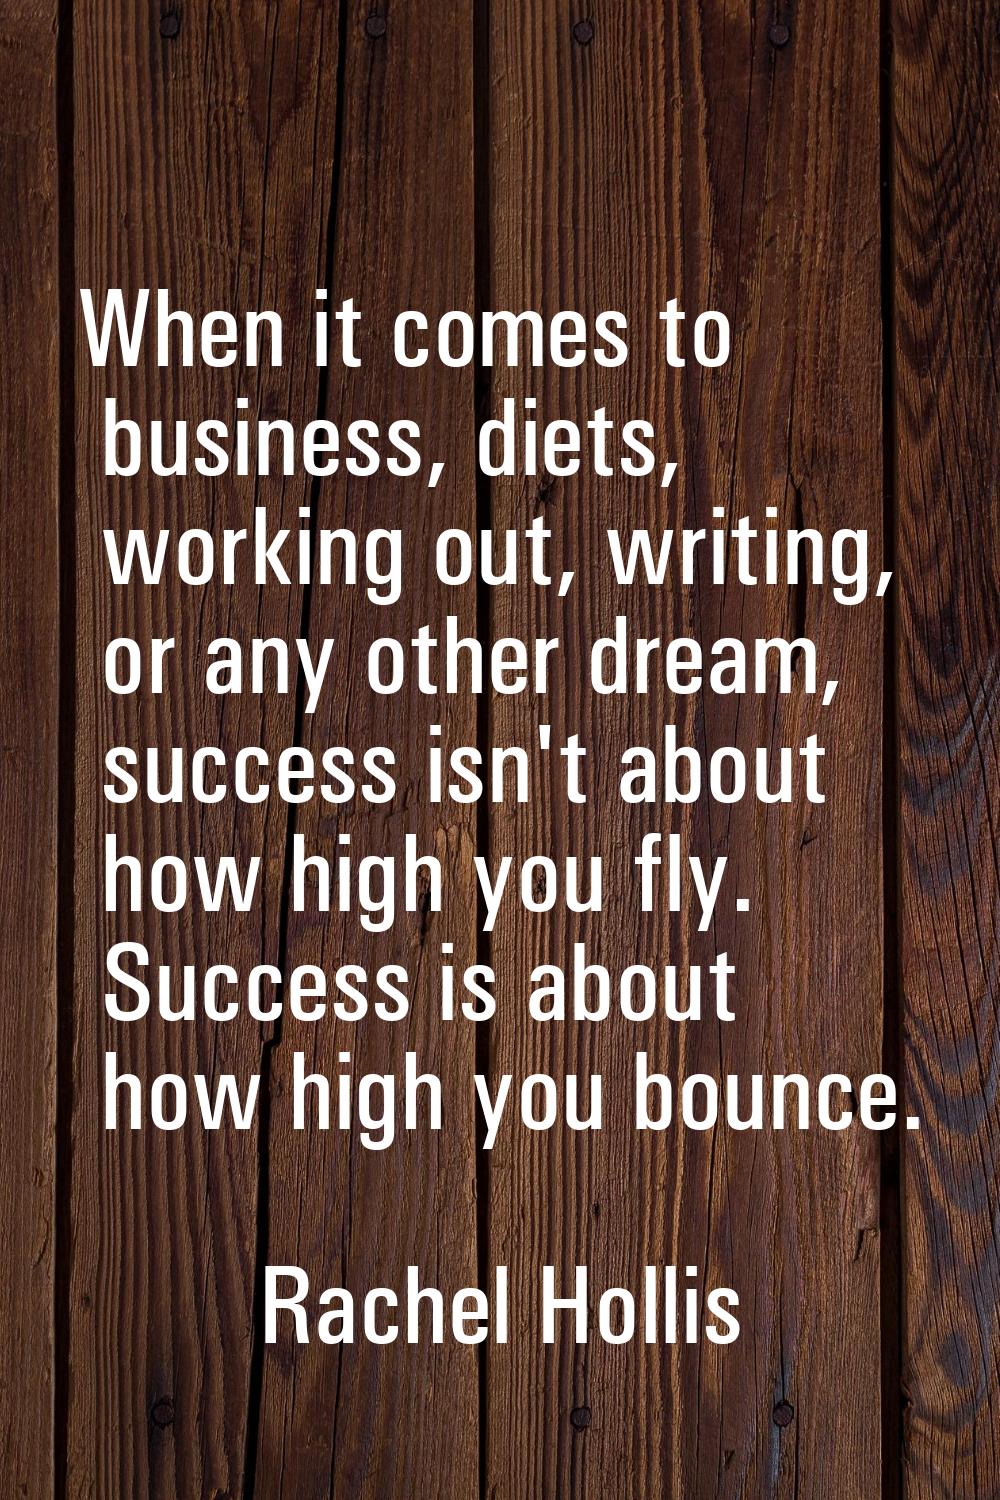 When it comes to business, diets, working out, writing, or any other dream, success isn't about how